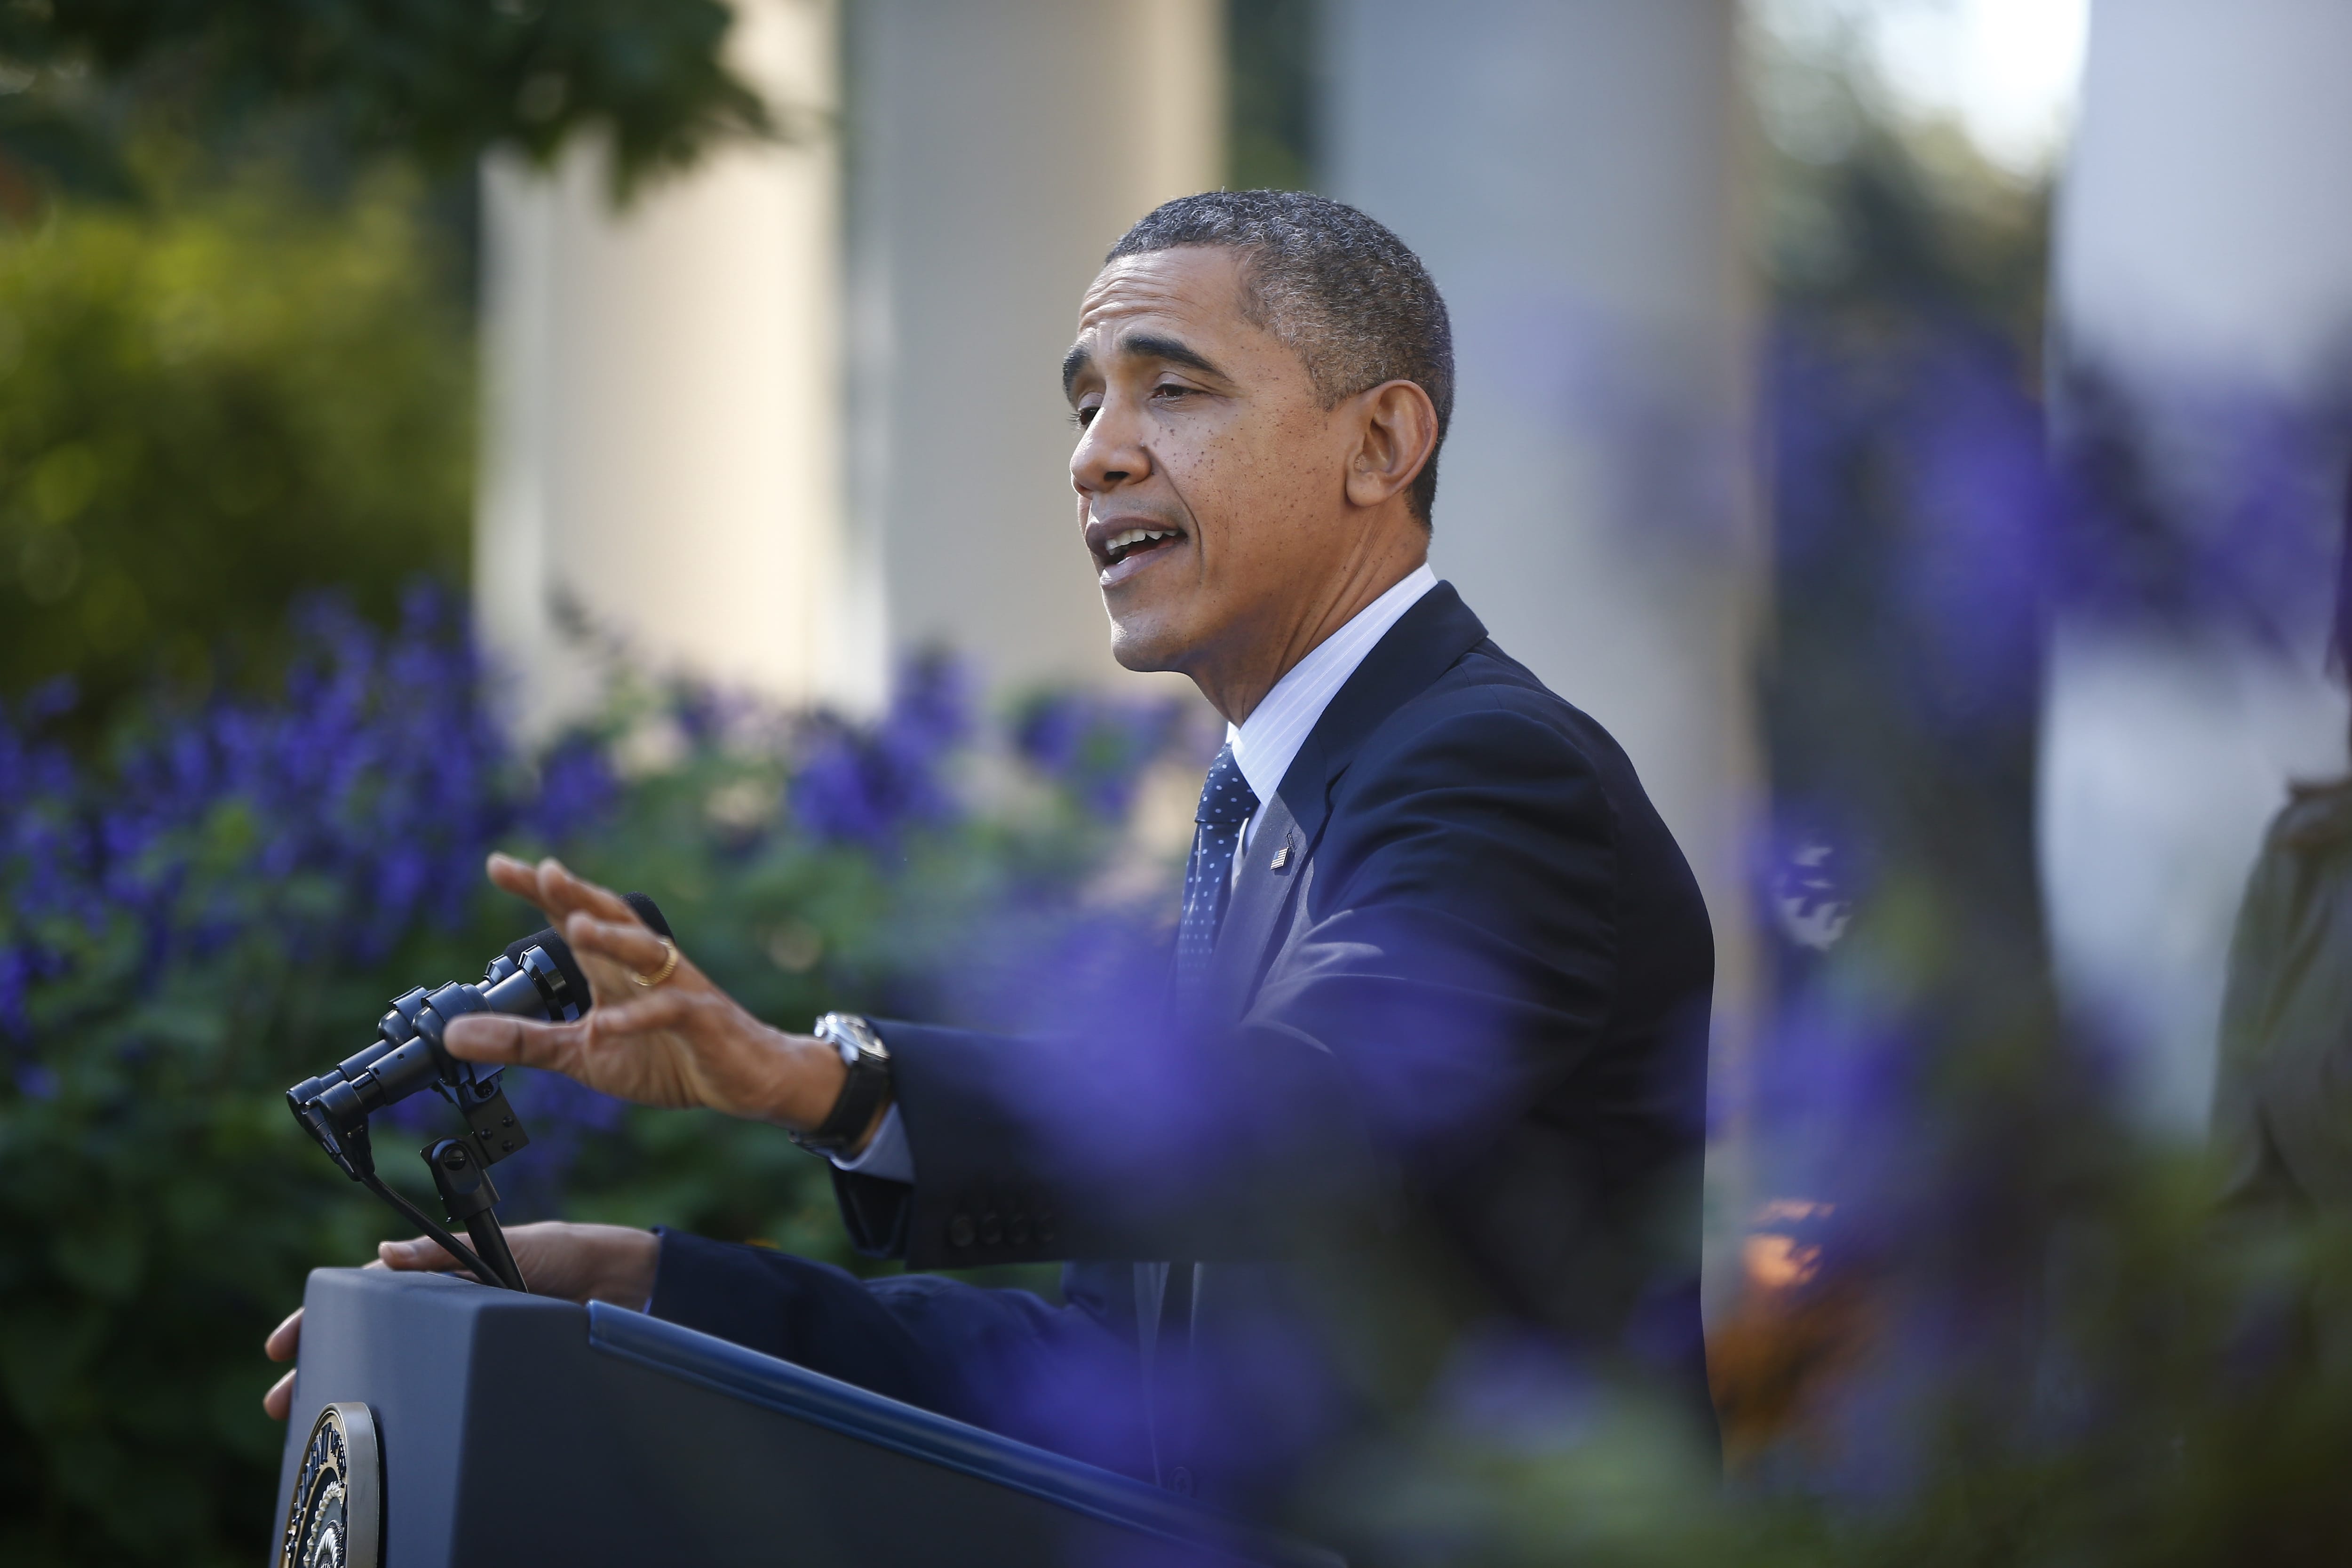 President Barack Obama speaks during an event in the Rose Garden of the White House on the initial rollout of the health care overhaul on Monday in Washington.